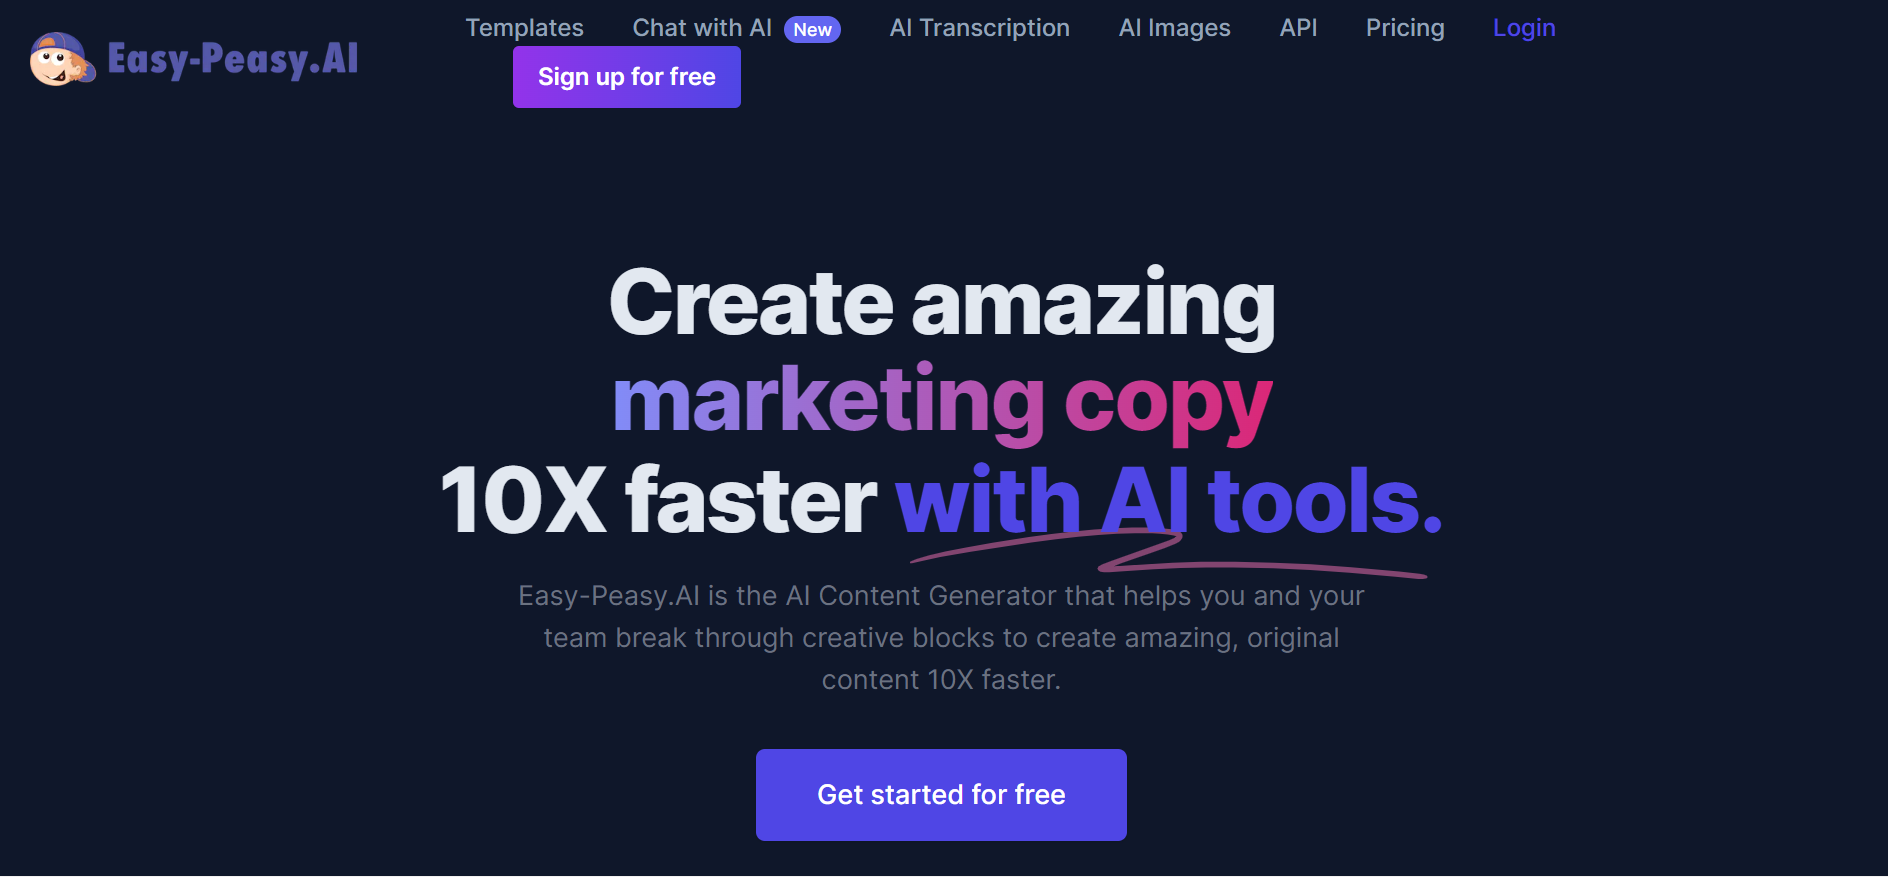 Easy-Peasy.AI: The Secret to Effortlessly Creating High-Quality Content with AI Tools